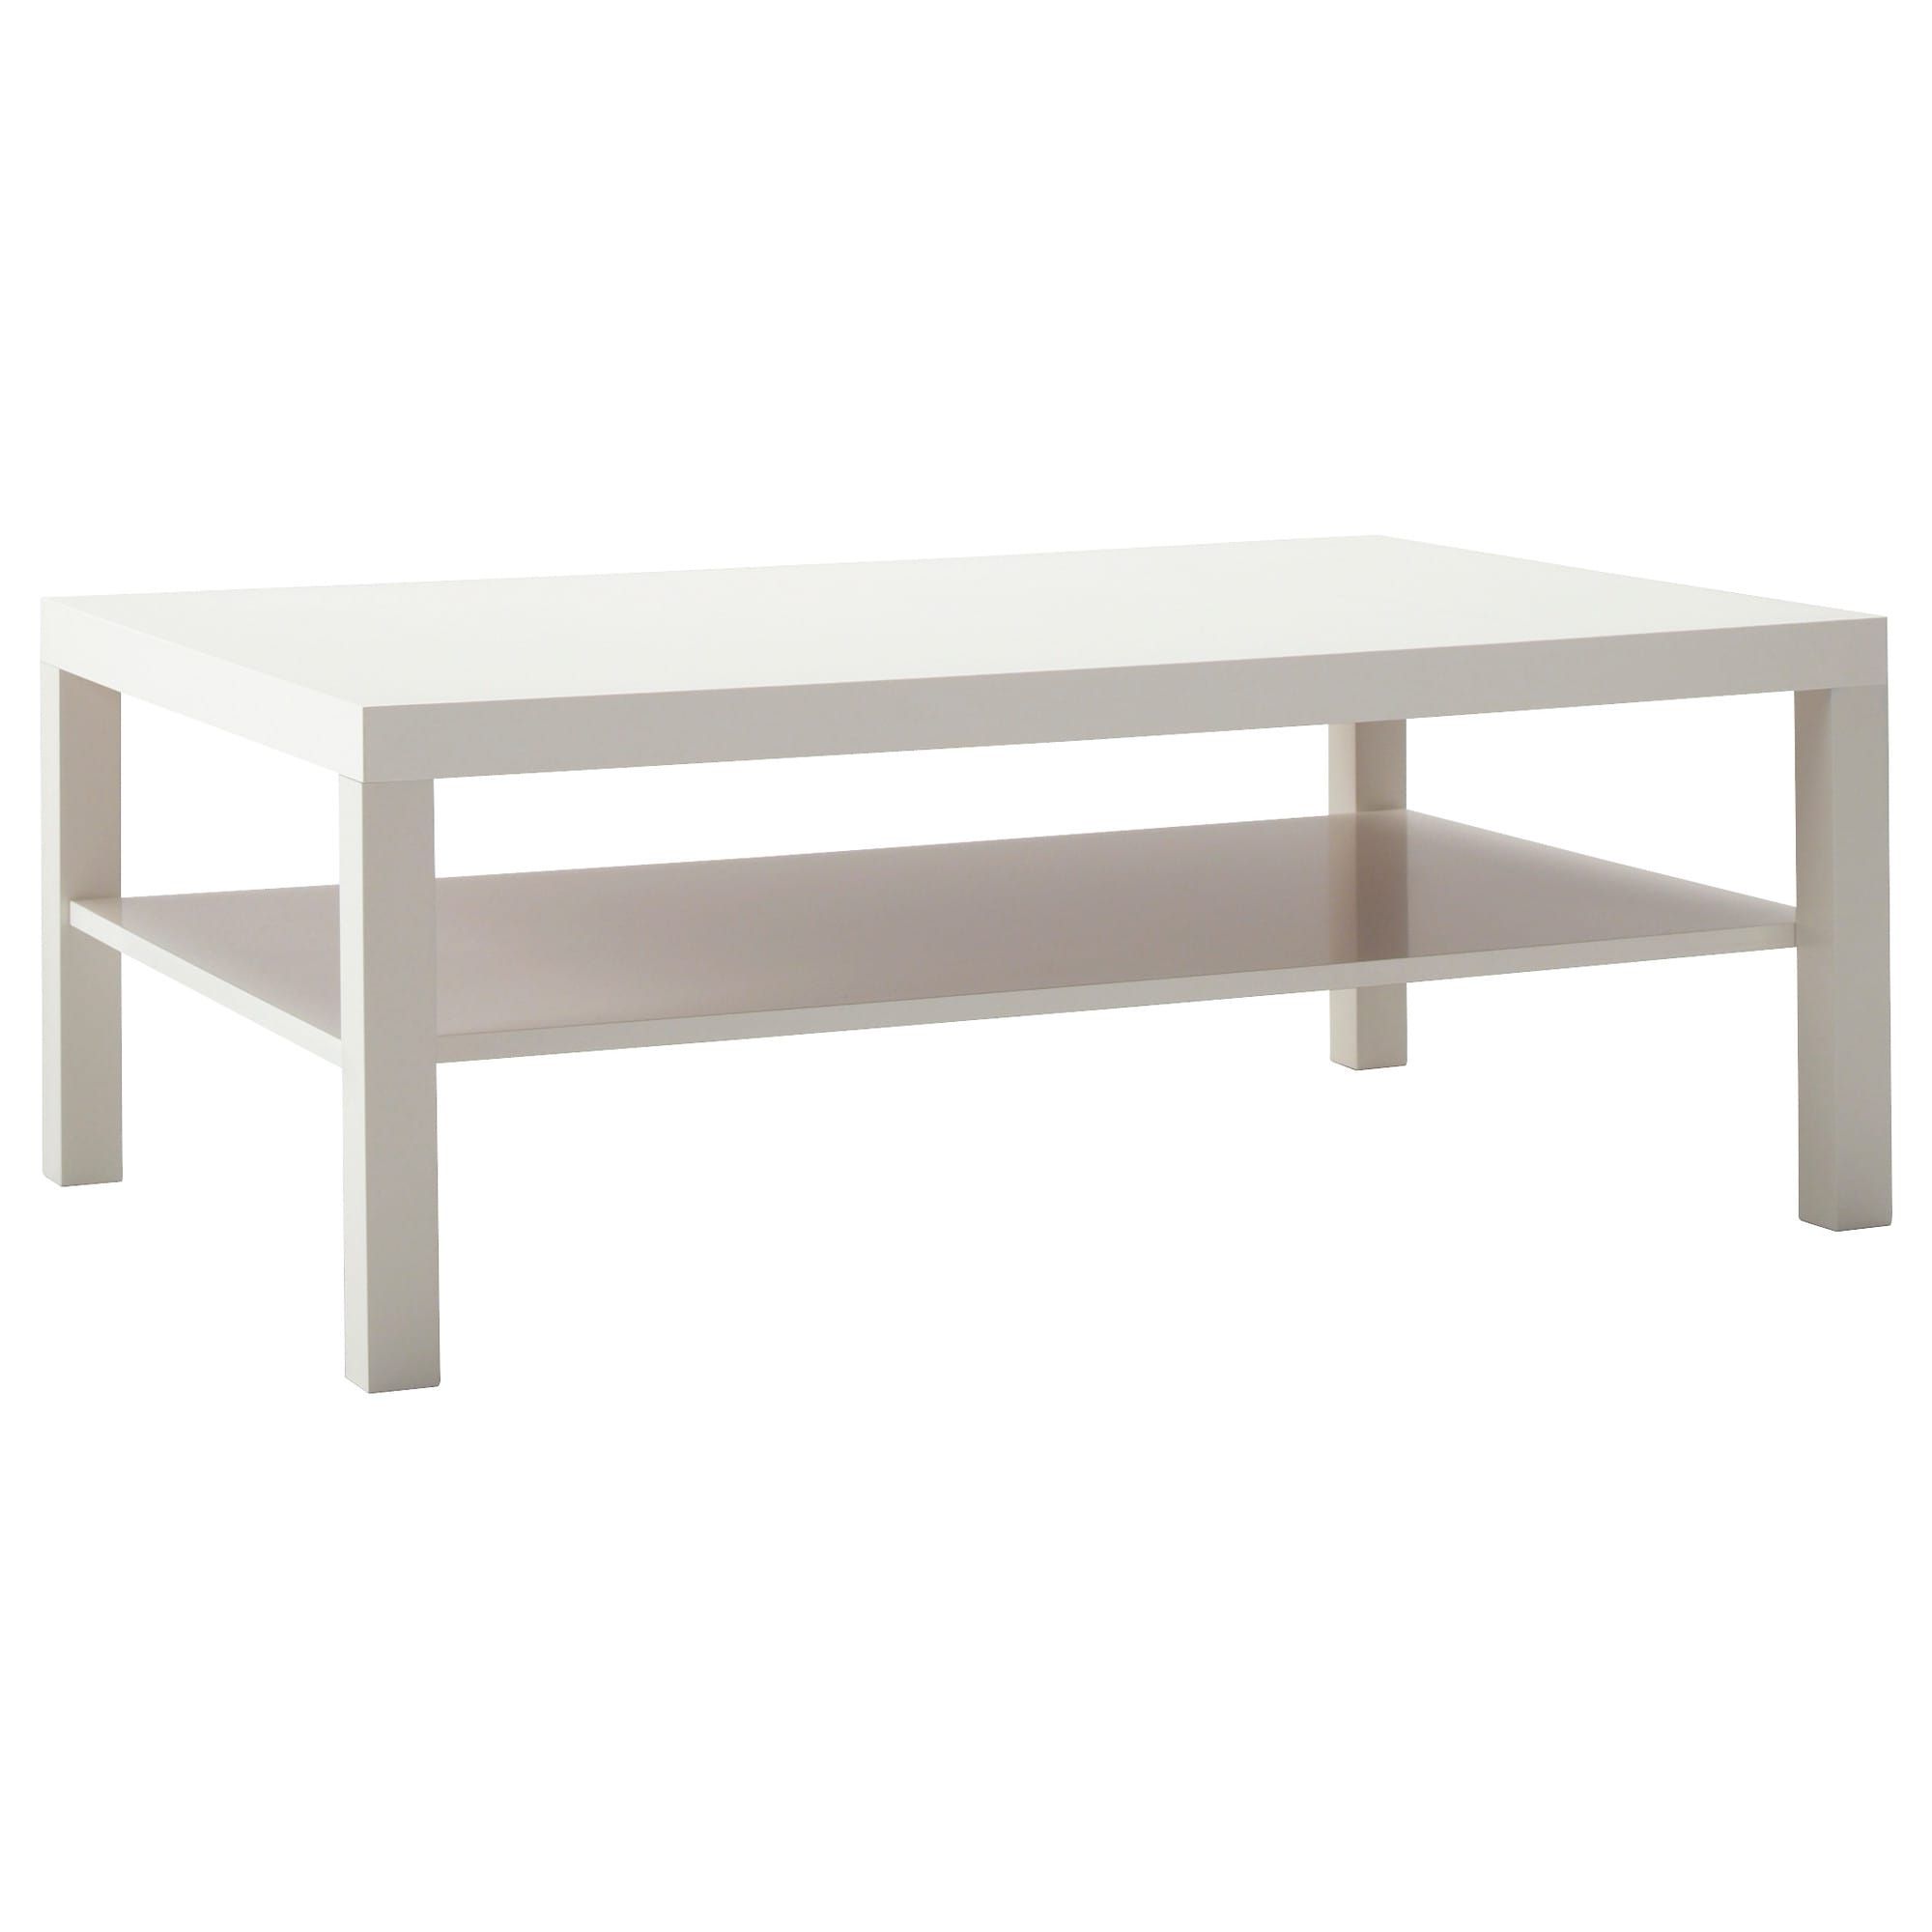 Lack Coffee Table – White – Ikea Regarding Most Current Go Cart White Rolling Coffee Tables (View 12 of 20)